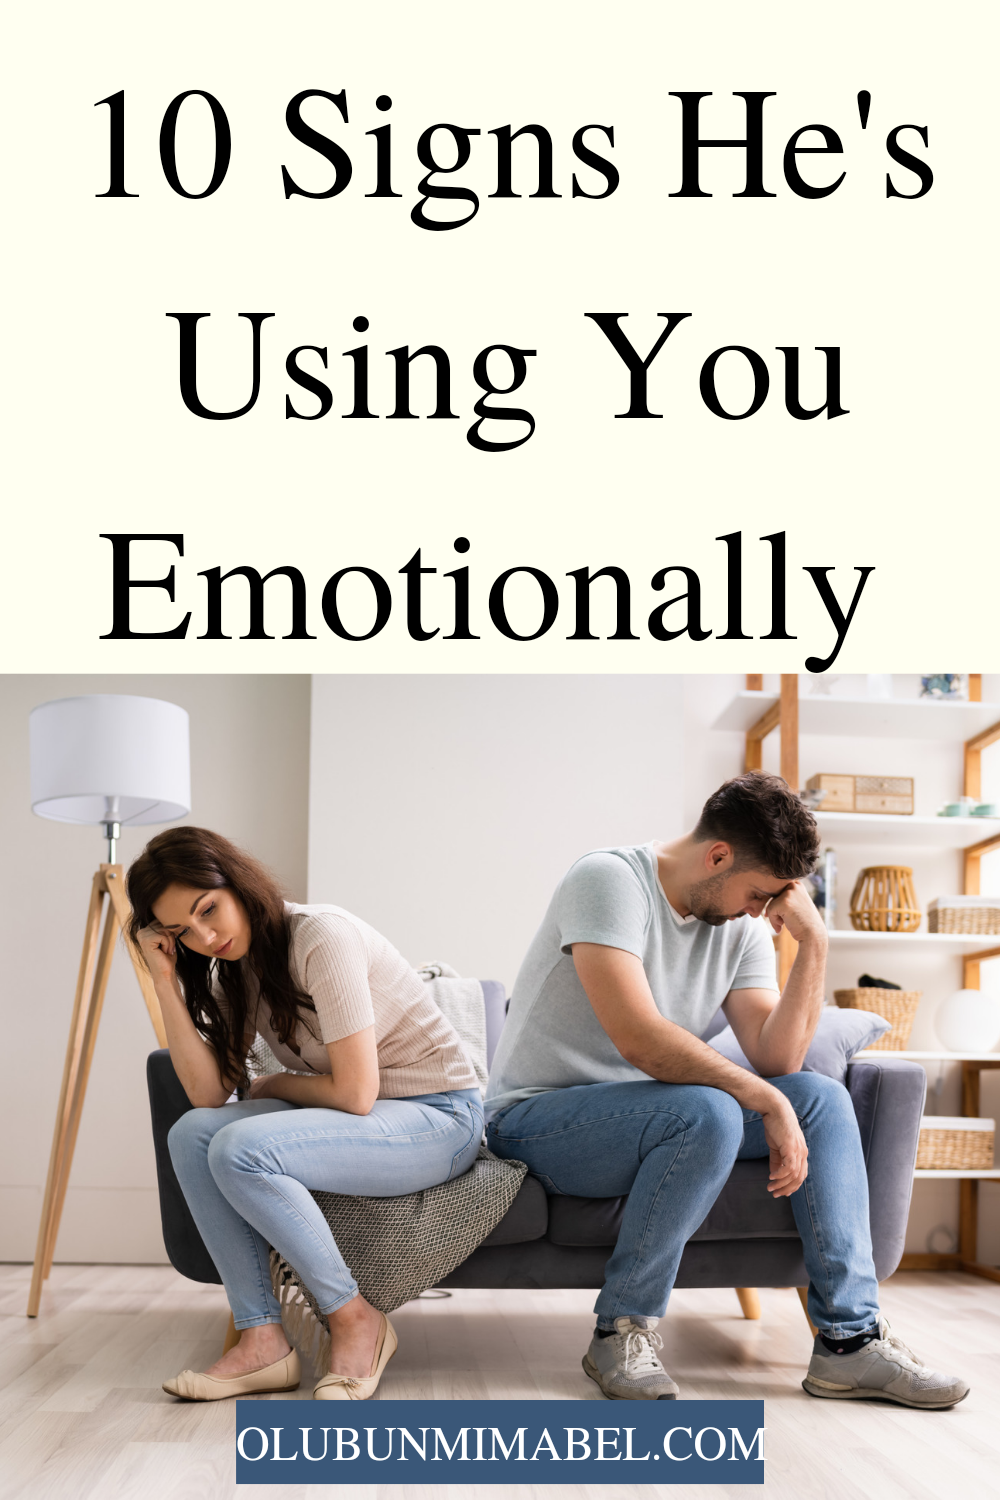 Signs He is Emotionally Using You